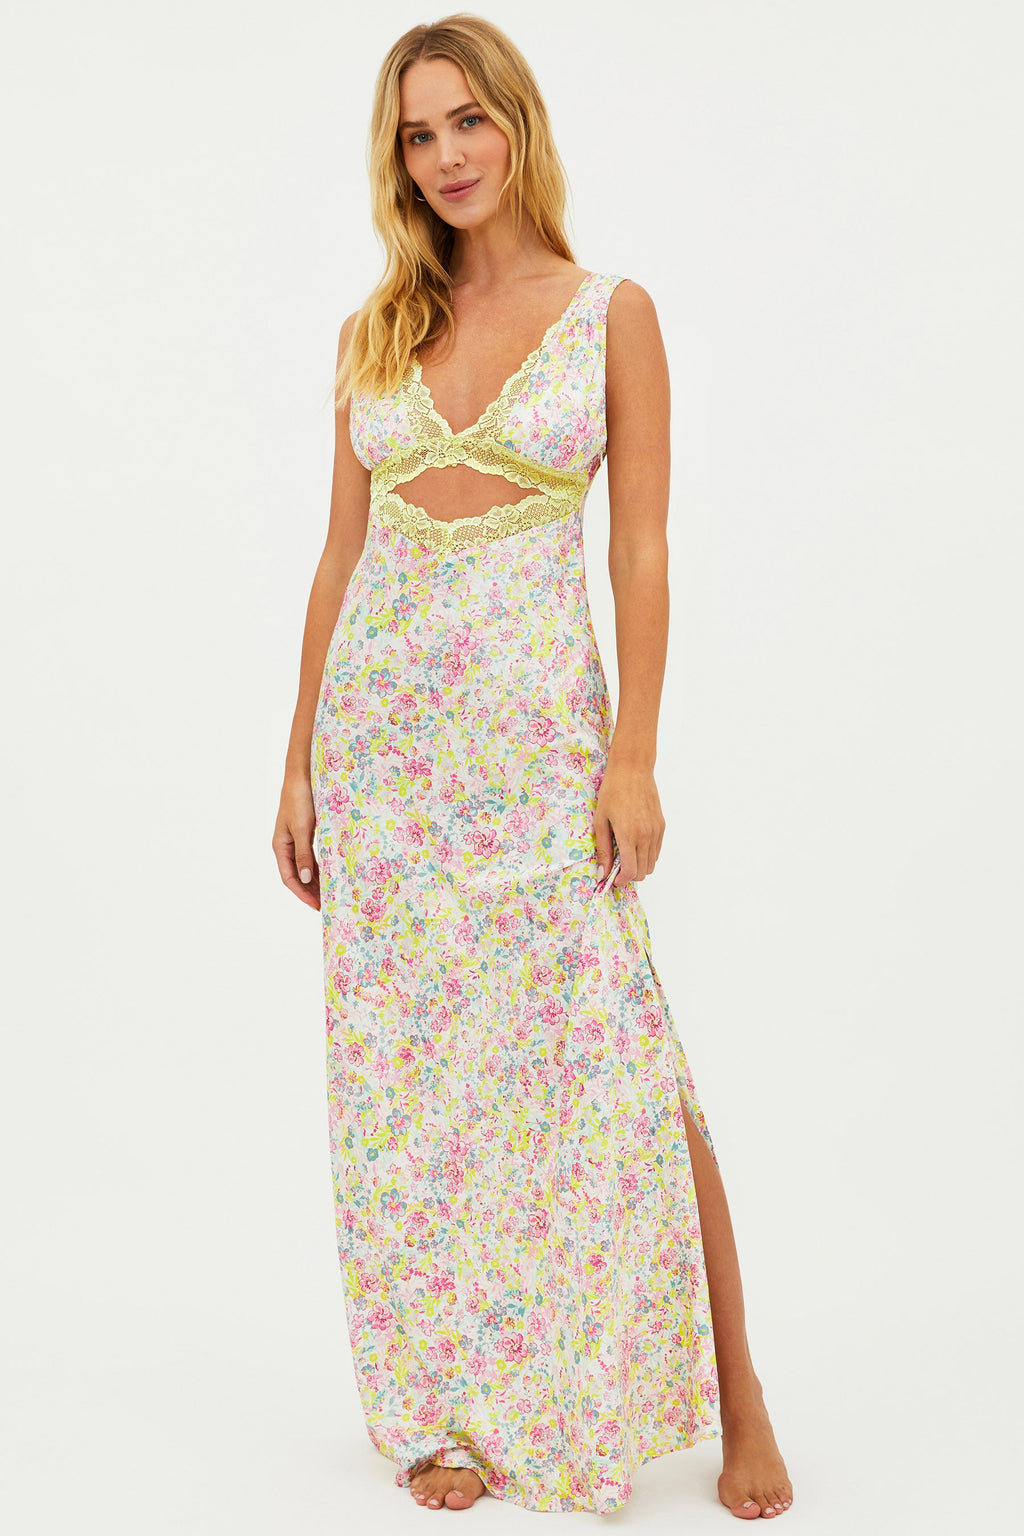 Kimi Dress Forget Me Not Floral